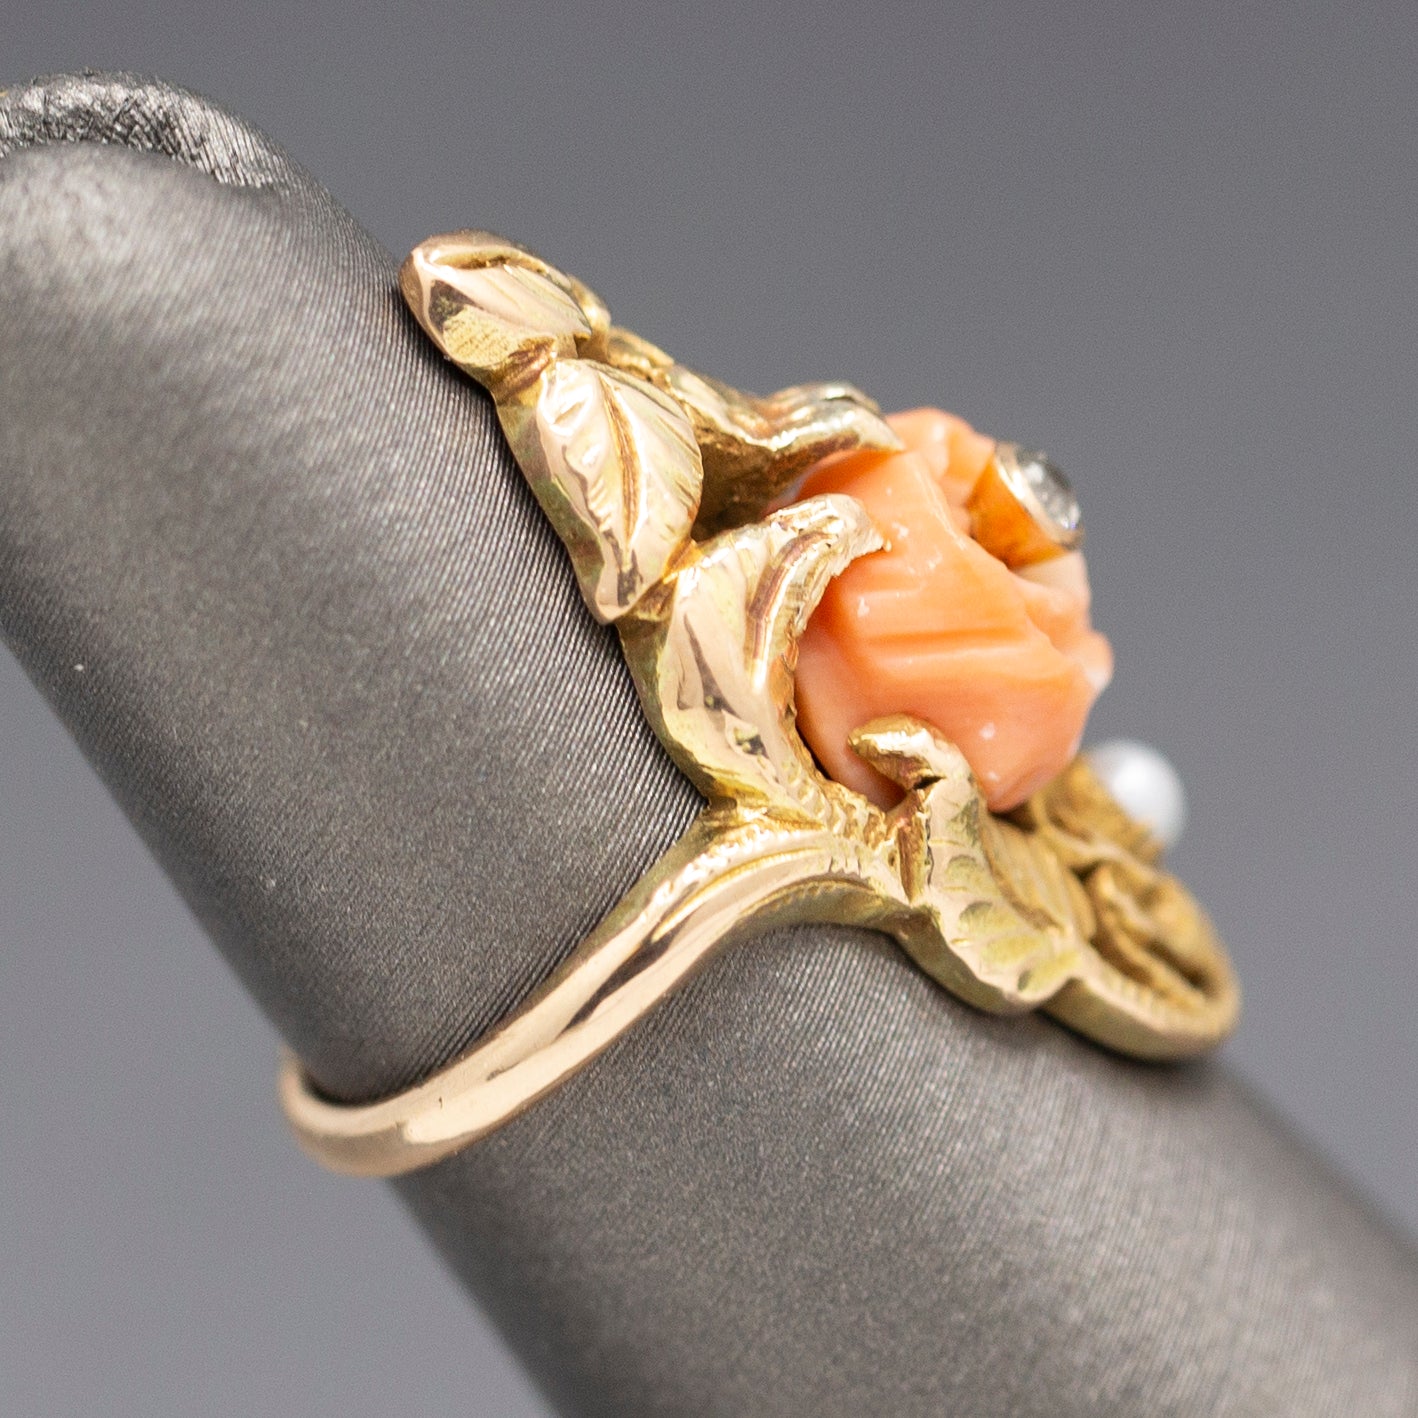 Romantic Art Nouveau Coral Diamond and Pearl Dinner Ring in 14k Yellow Gold